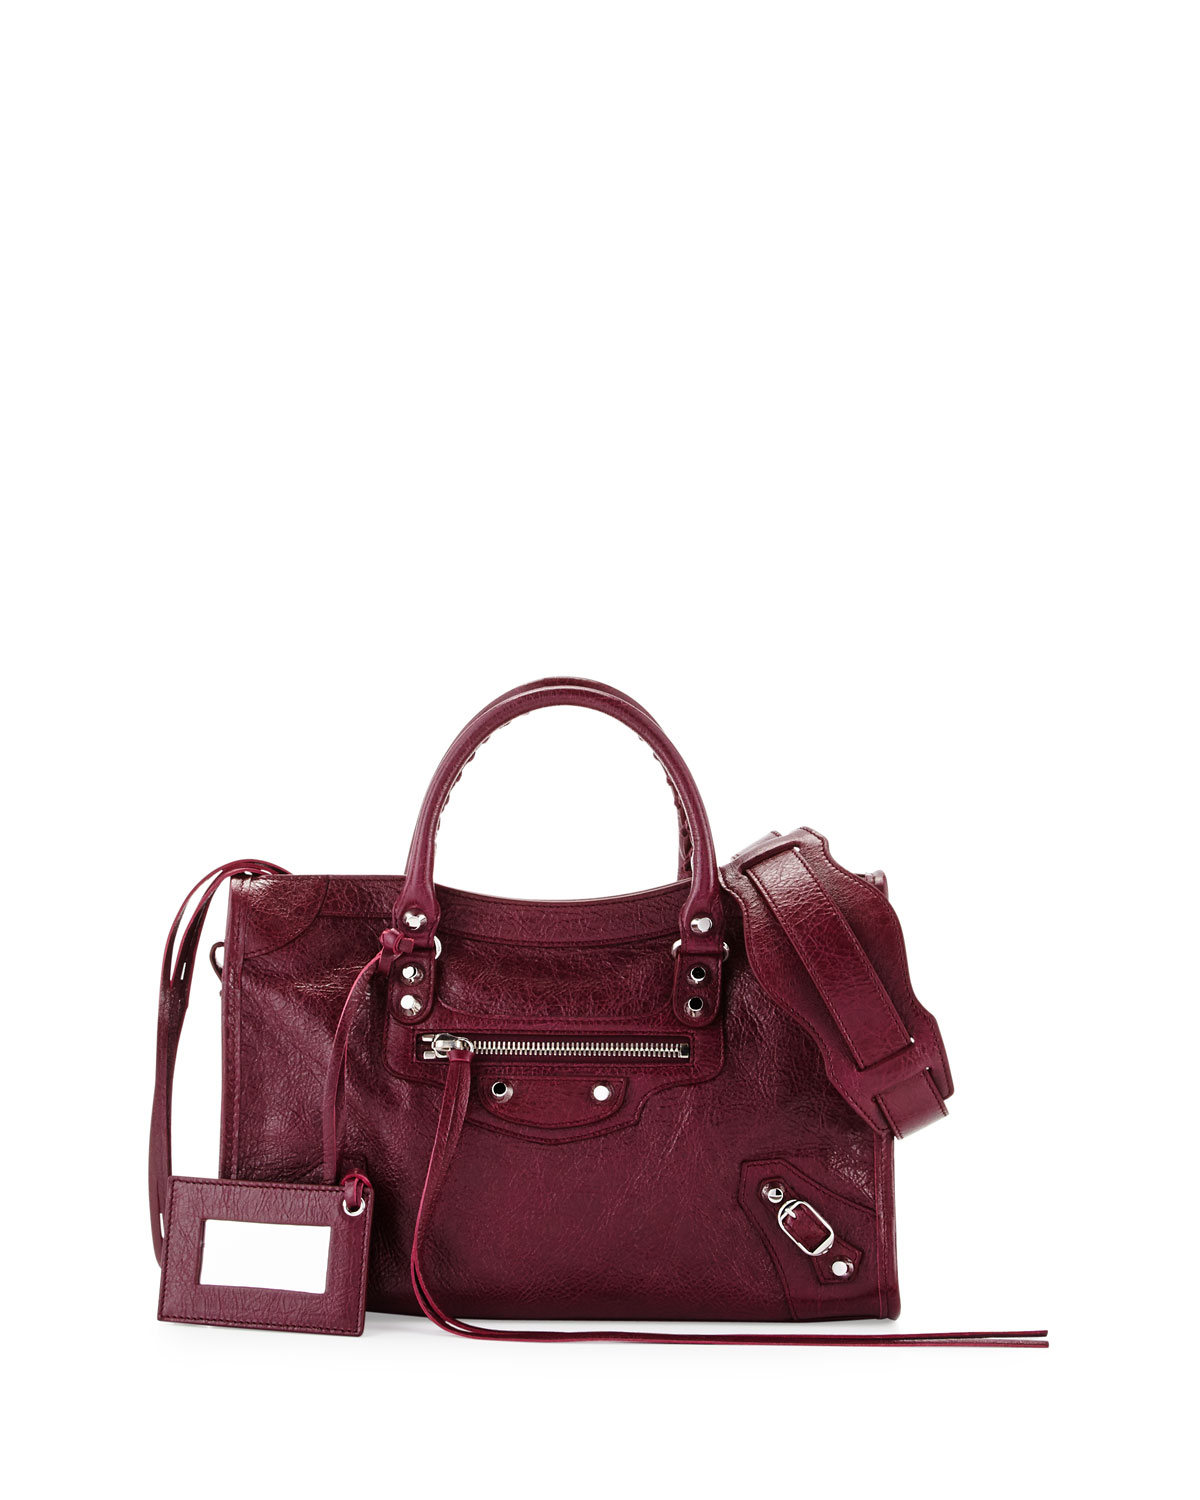 Hermes Kelly 25 Sellier One Year Review  pros, cons, one year wear and  tear, worth it? 